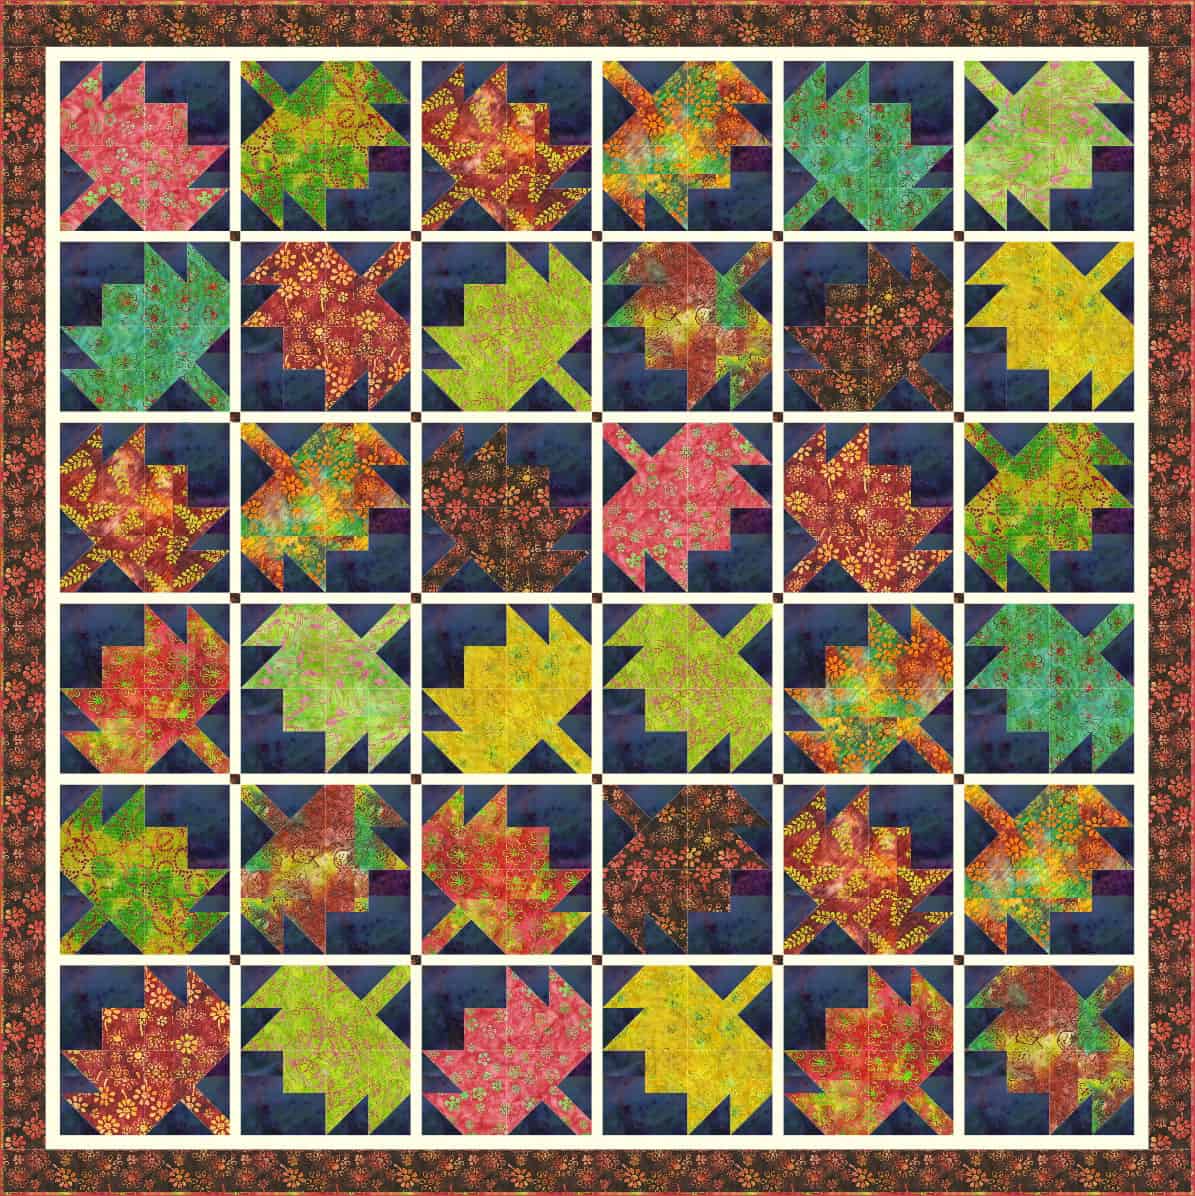 Falling Leaves quilt